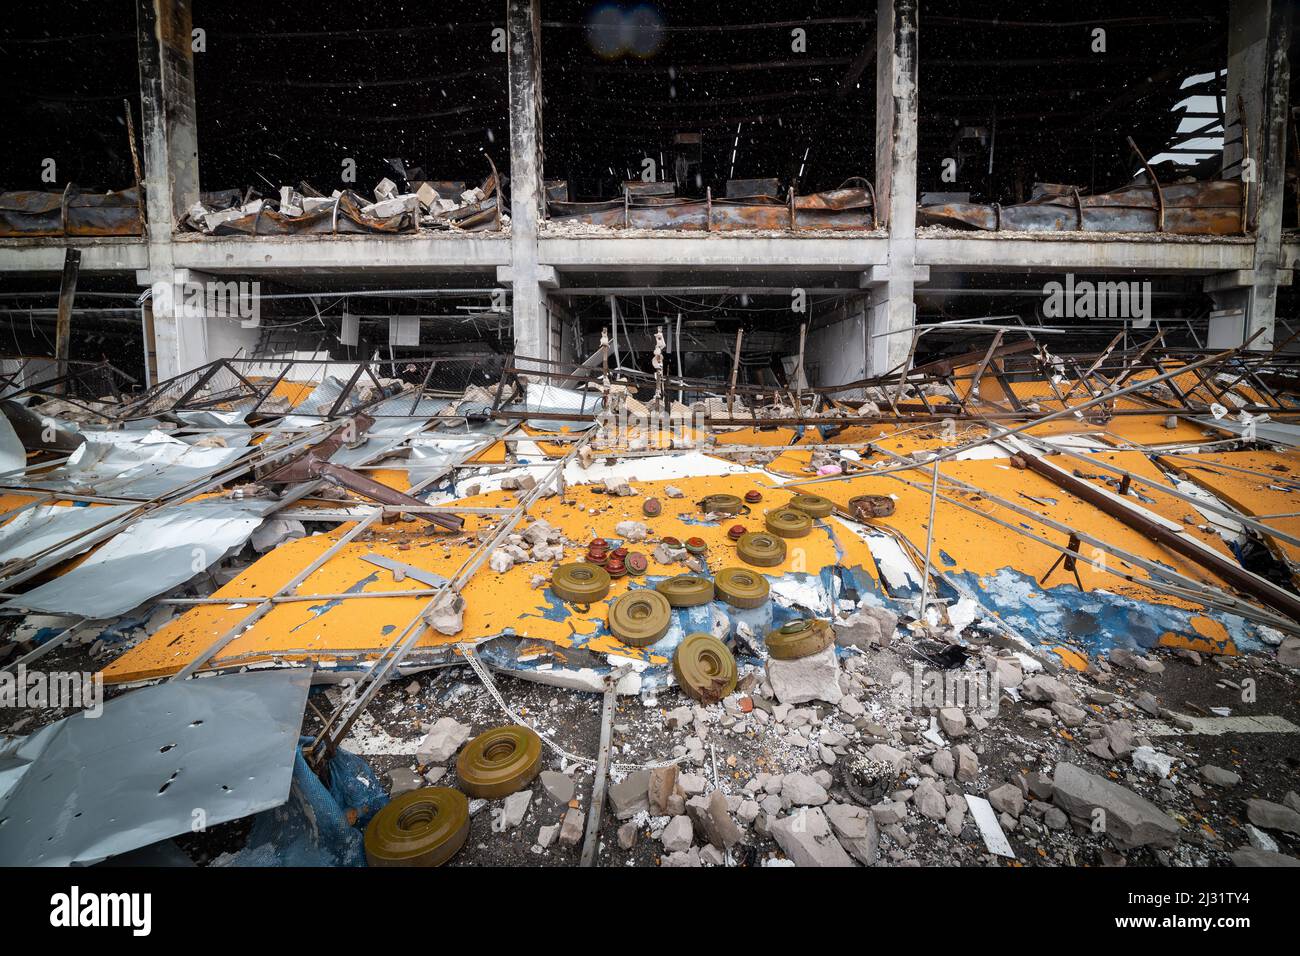 scattered mines before the bombing of the mall in Bucha, Ukraine, pictured 4.4.2022 (CTK Photo/Vojtech Darvik Maca) Stock Photo